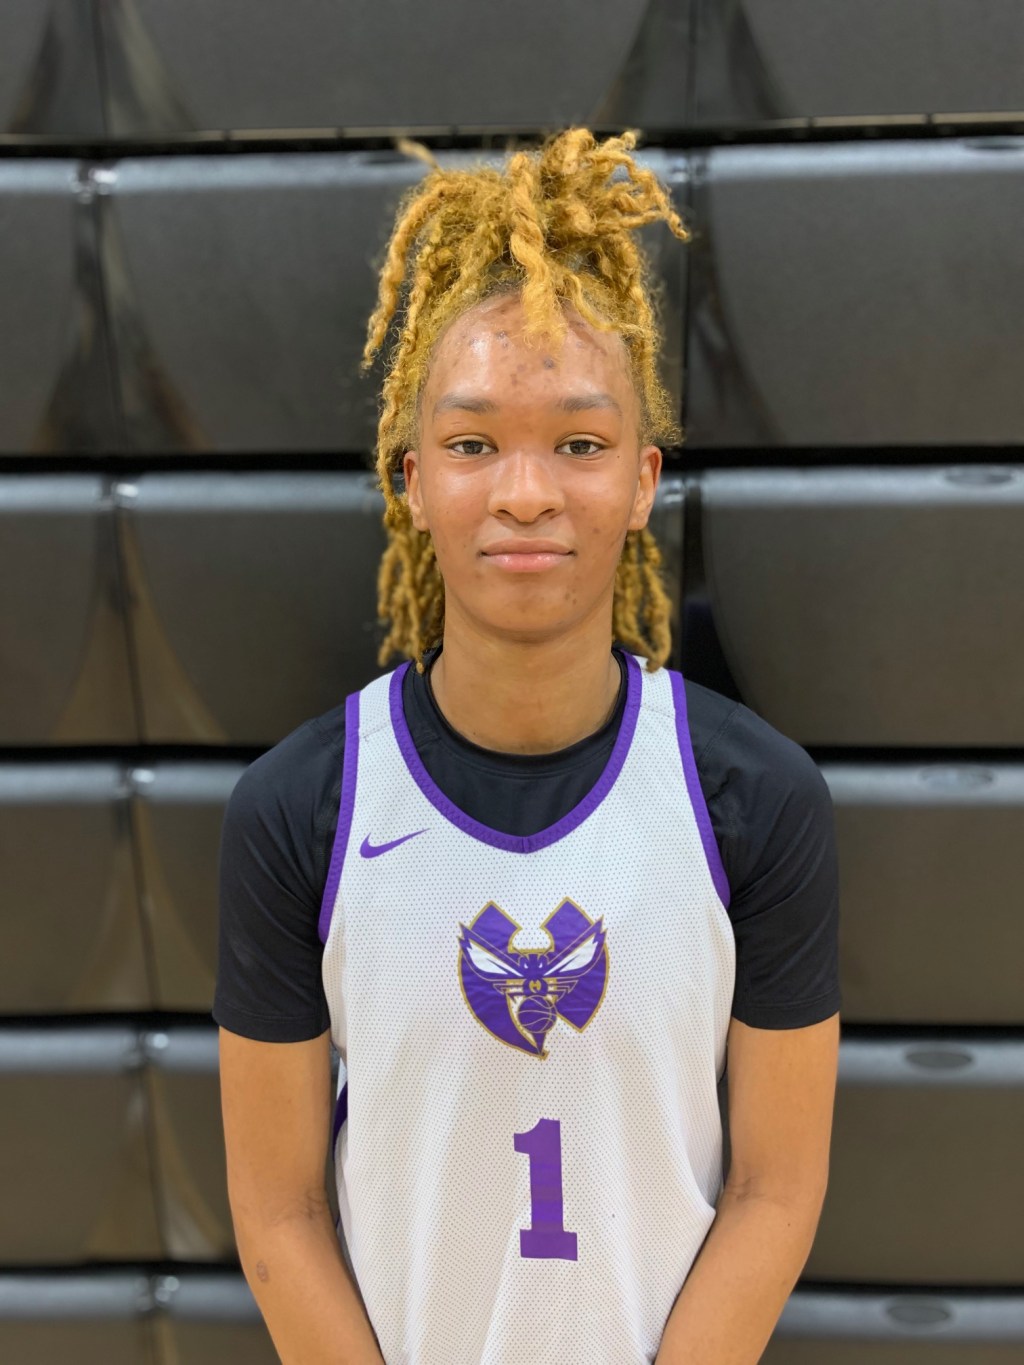 2023 Player Rankings Update: Stock Risers Pt. 2